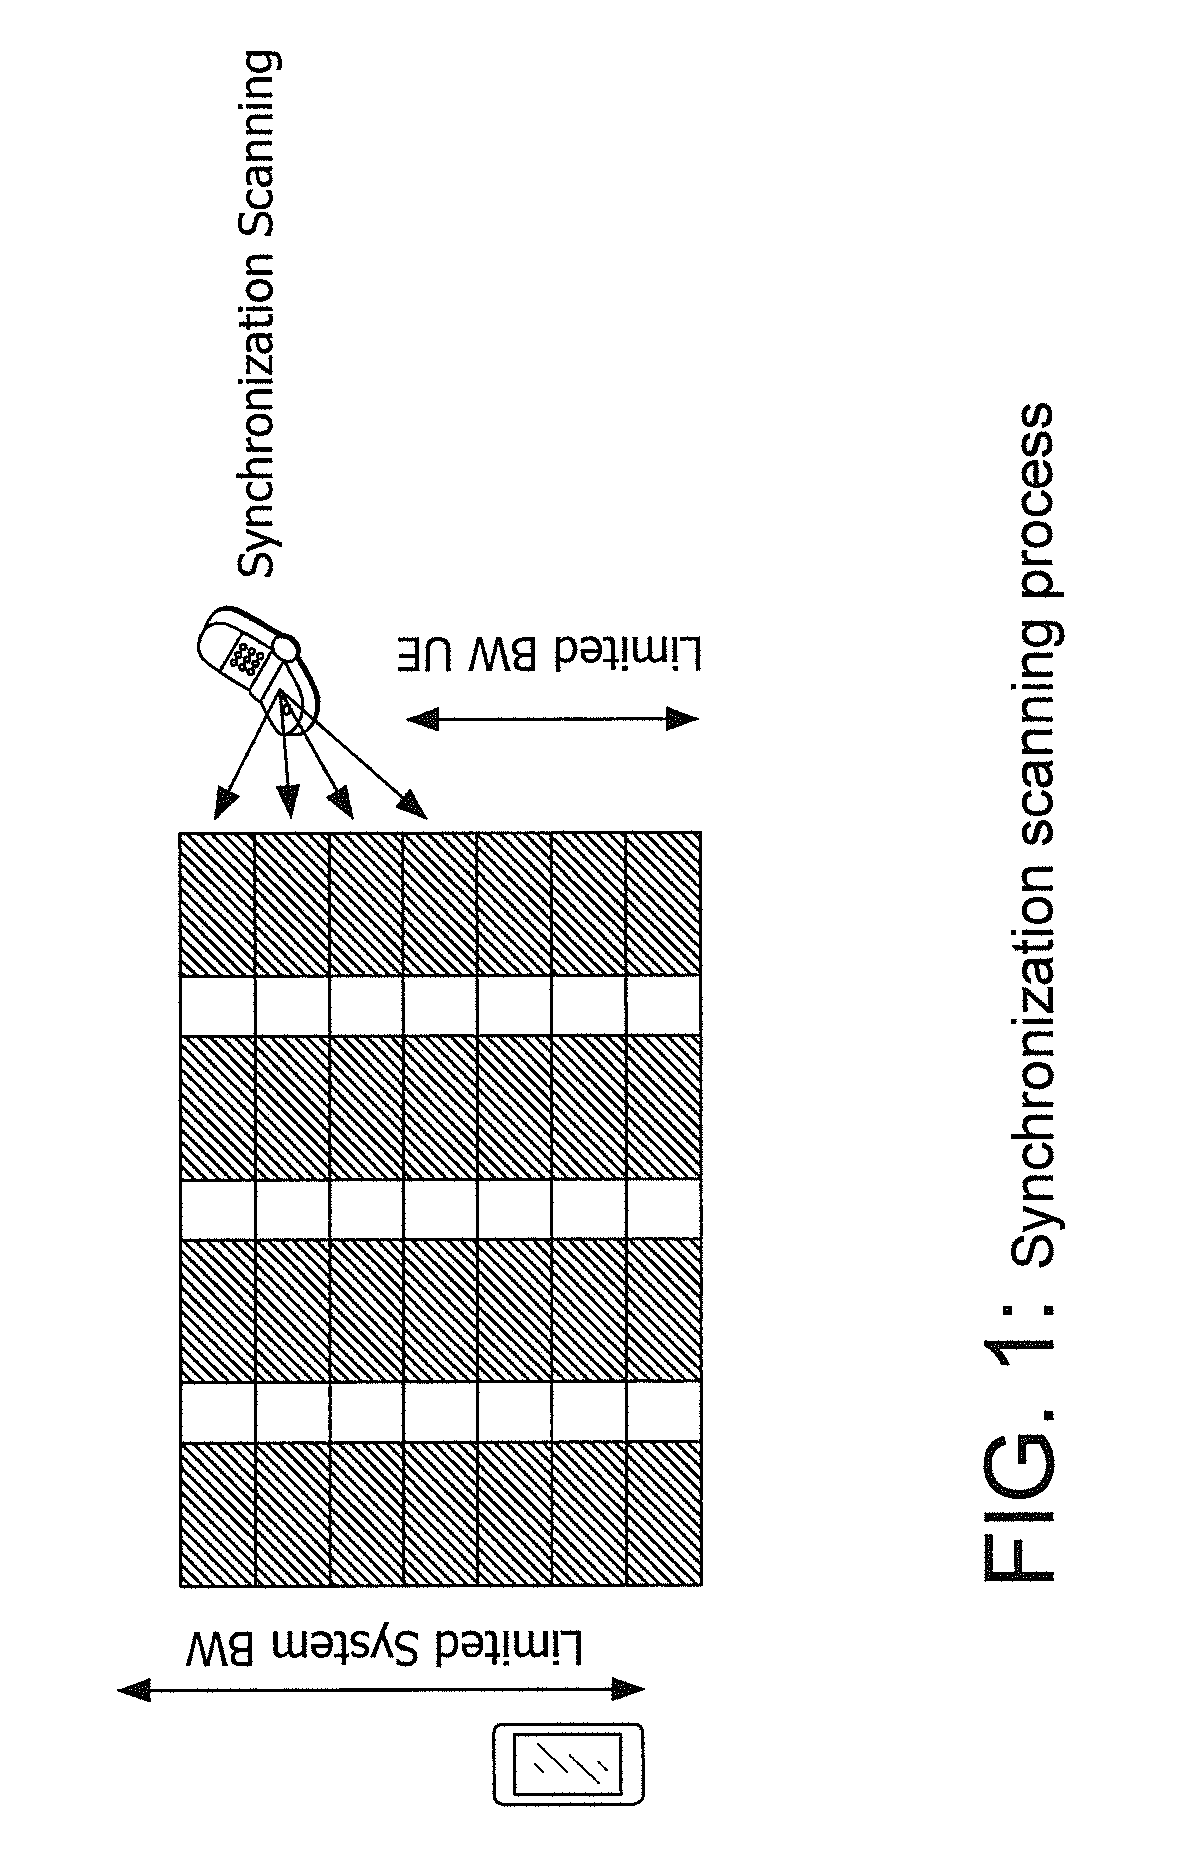 Device to device synchroinzation for limited bandwidth ues